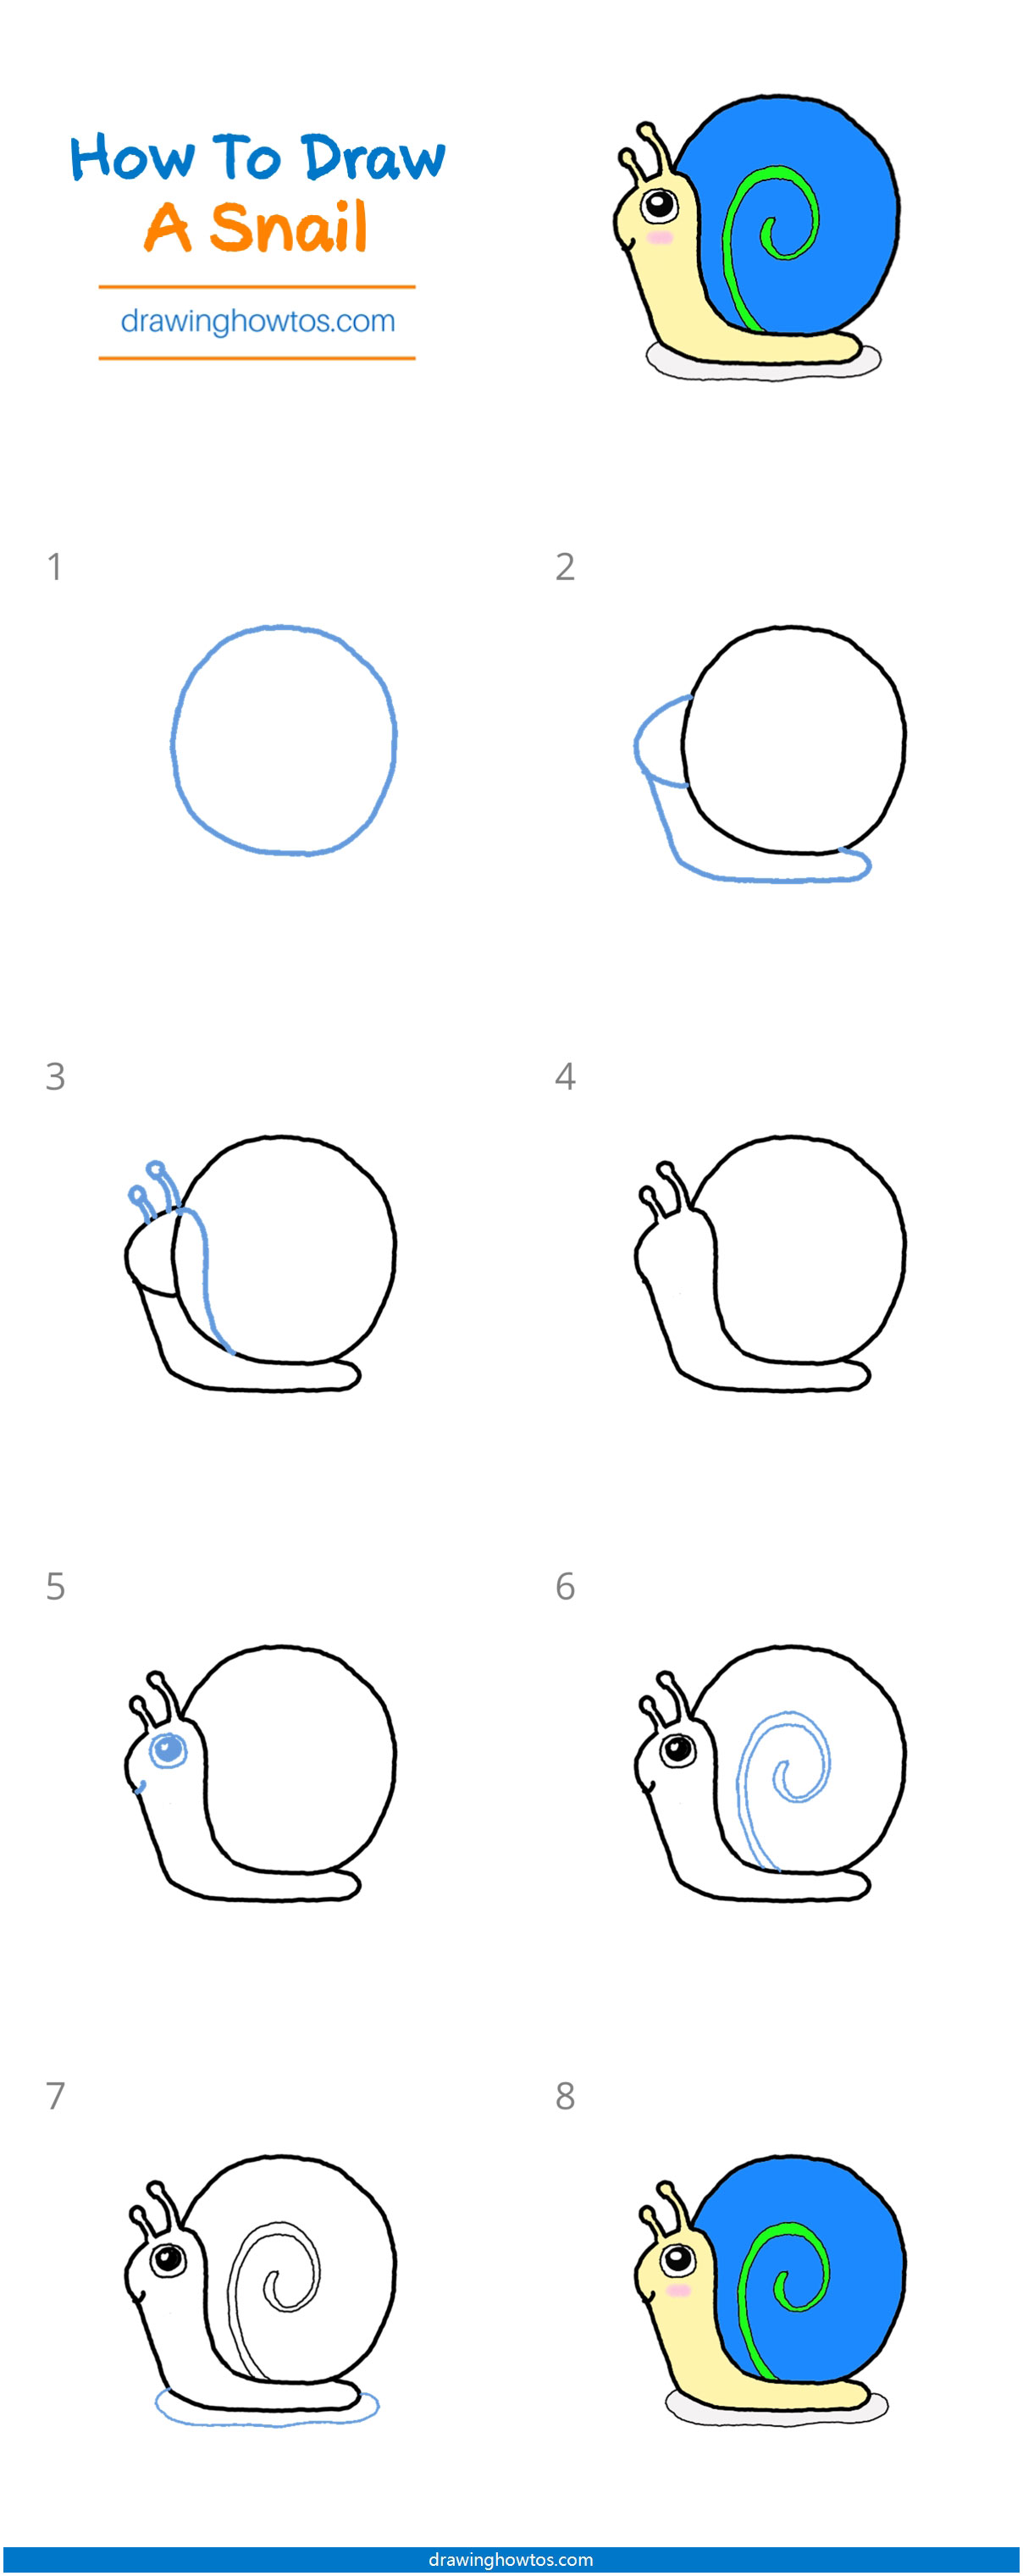 How to Draw a Snail Step by Step